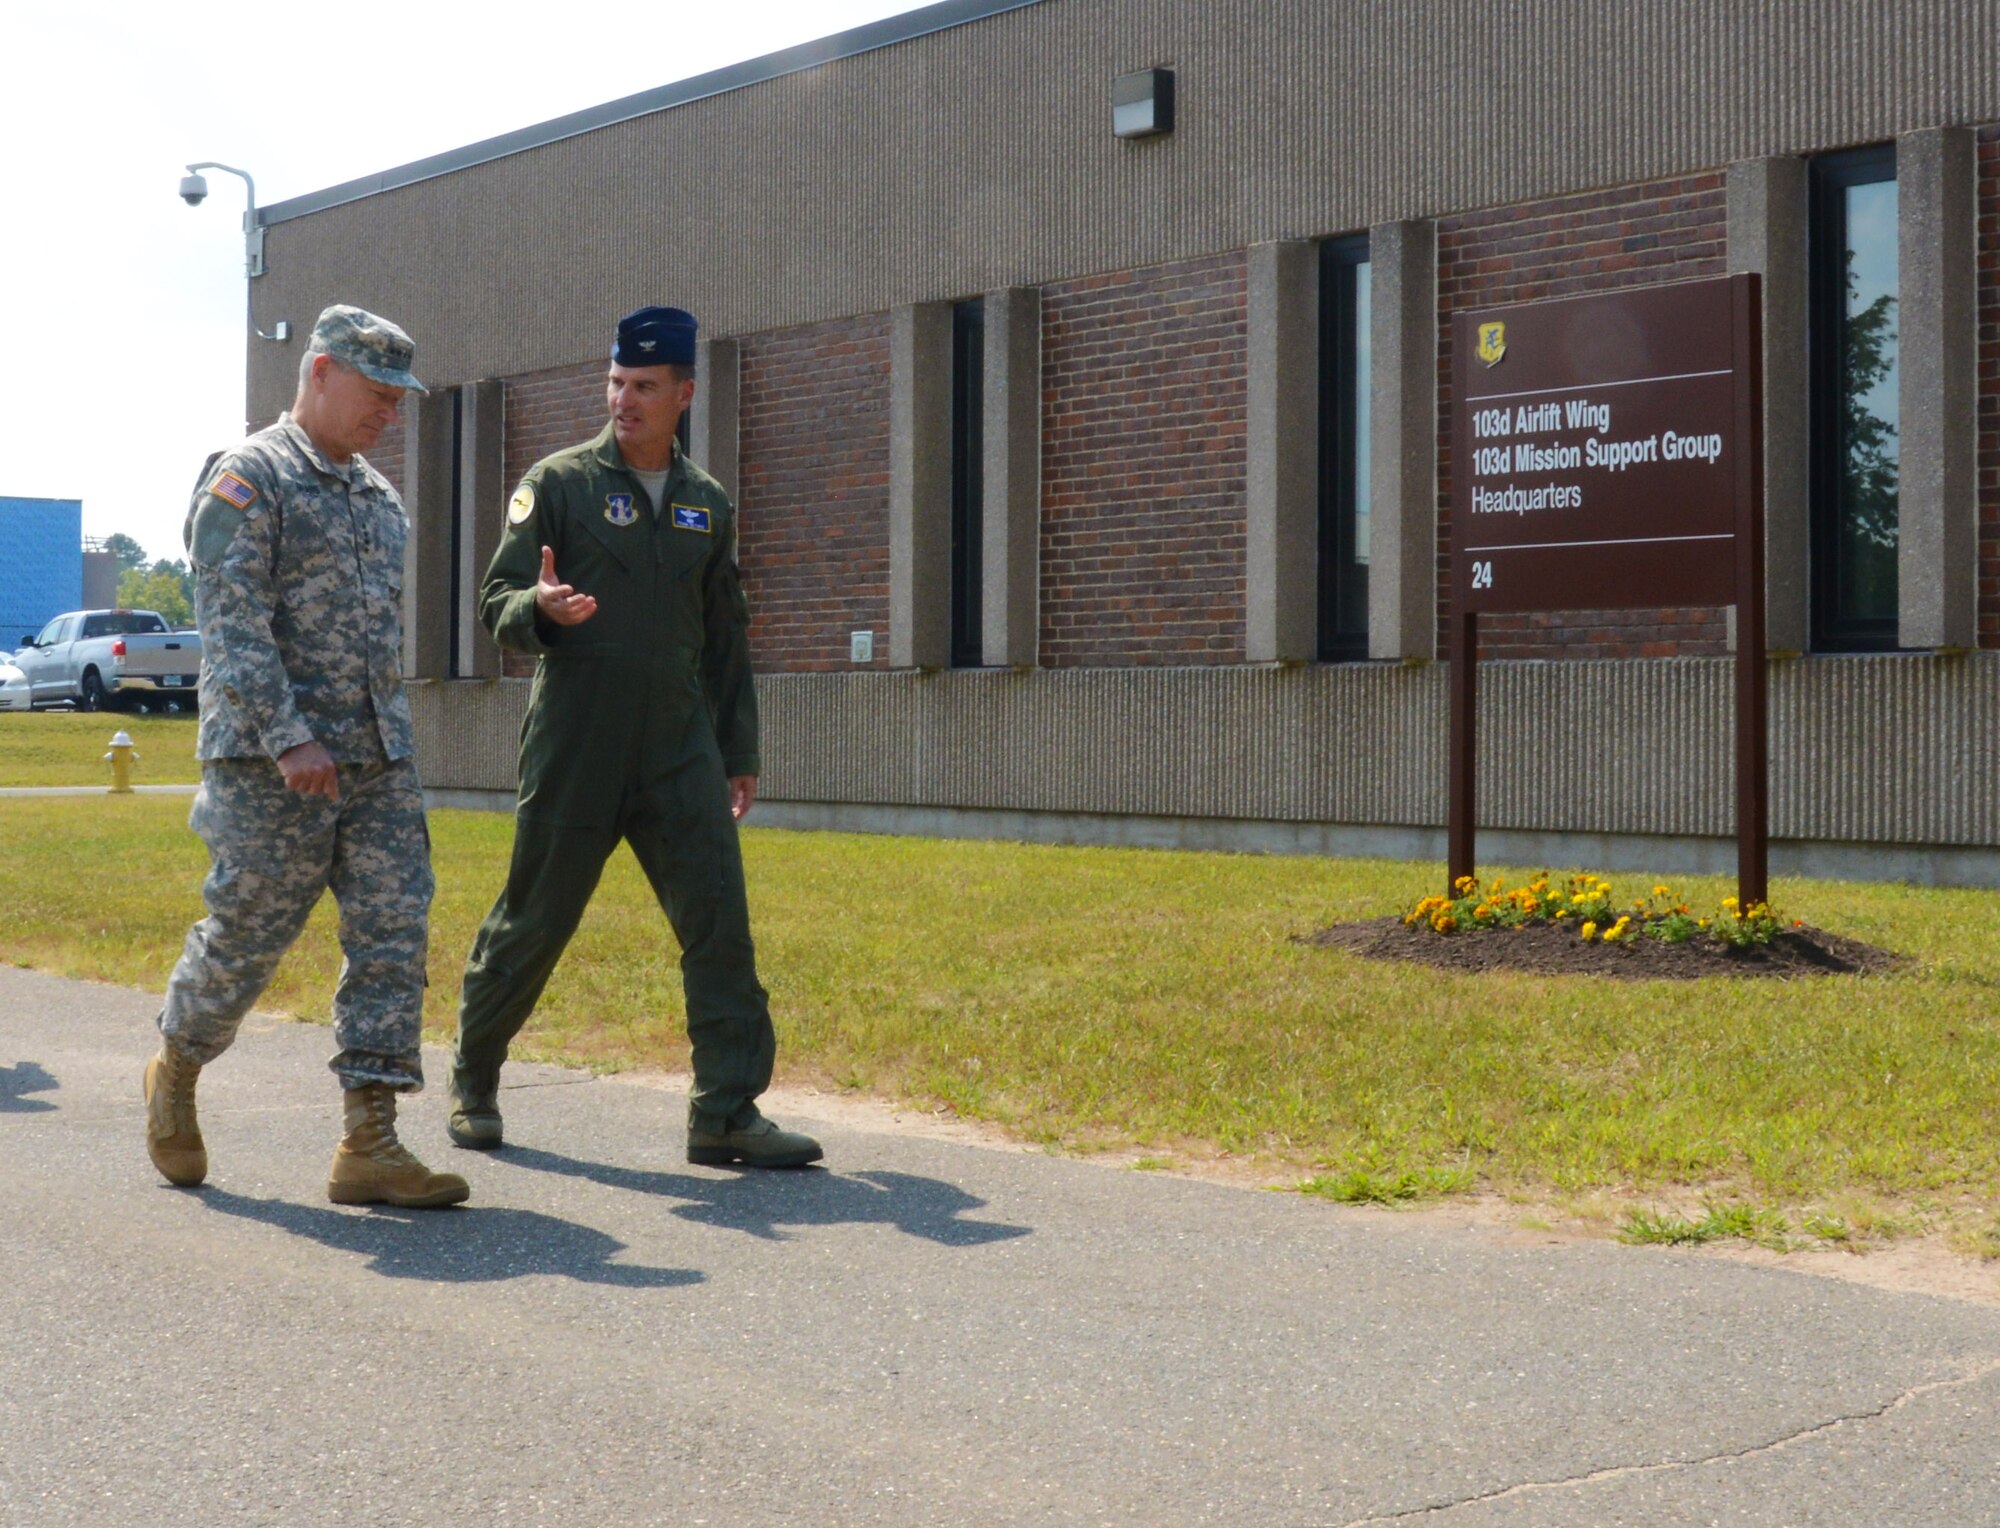 Col. Frank Detorie, commander of the 103rd Airlift Wing, and Gen. Frank J. Grass, Chief of the National Guard Bureau, walk to wing headquarters to meet with the Flying Yankees, Sept. 6, 2014, at Bradley Air National Guard Base, East Granby, Conn. Grass held a townhall meeting at headquarters, taking the time to answer questions from 103rd Airmen. (U.S. Air National Guard photo by Senior Airman Jennifer Pierce)